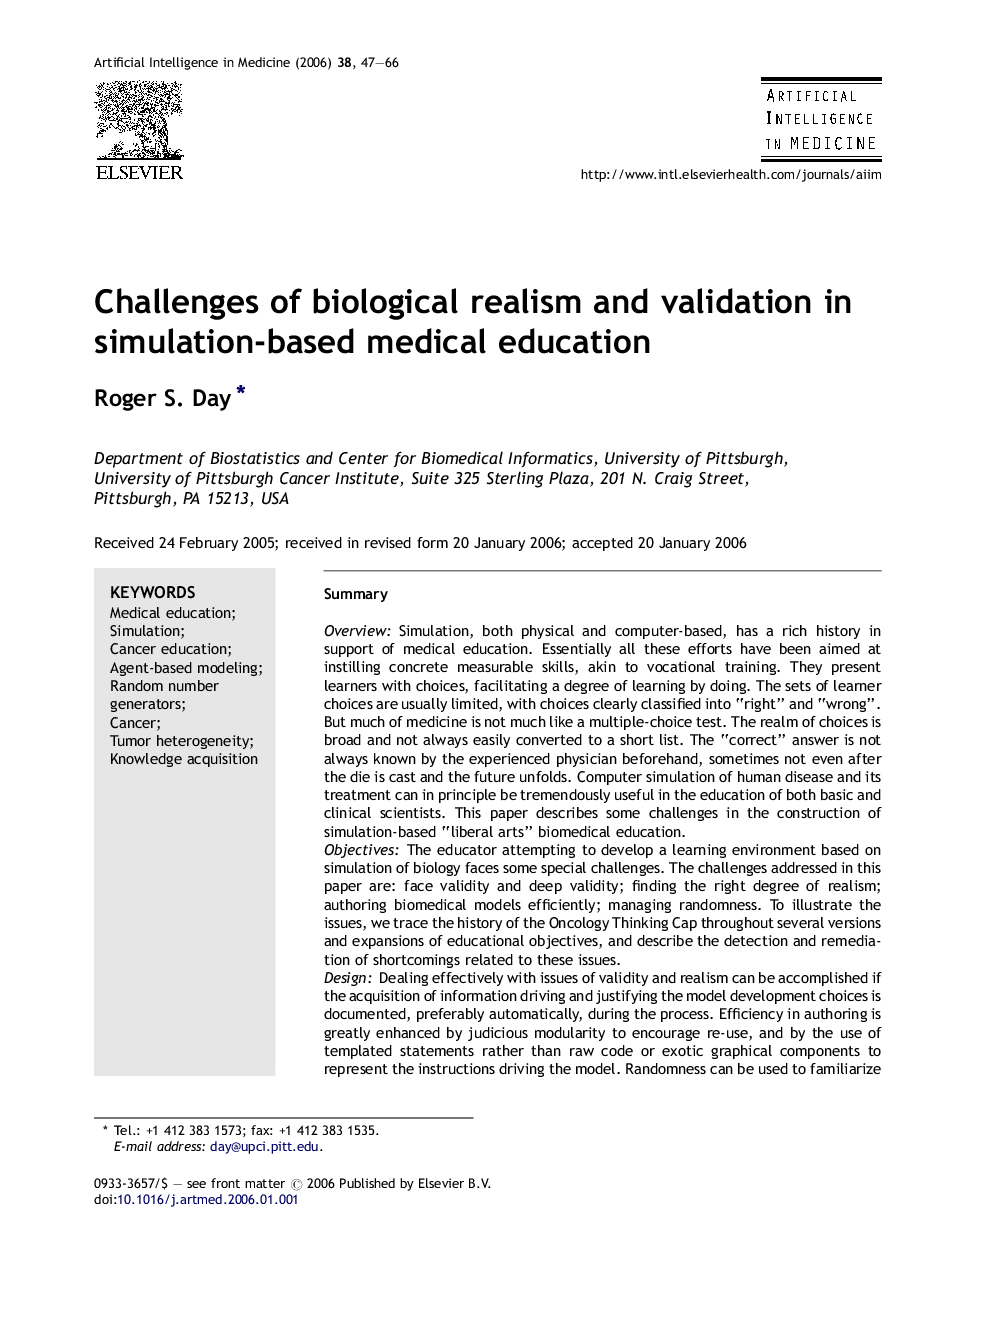 Challenges of biological realism and validation in simulation-based medical education